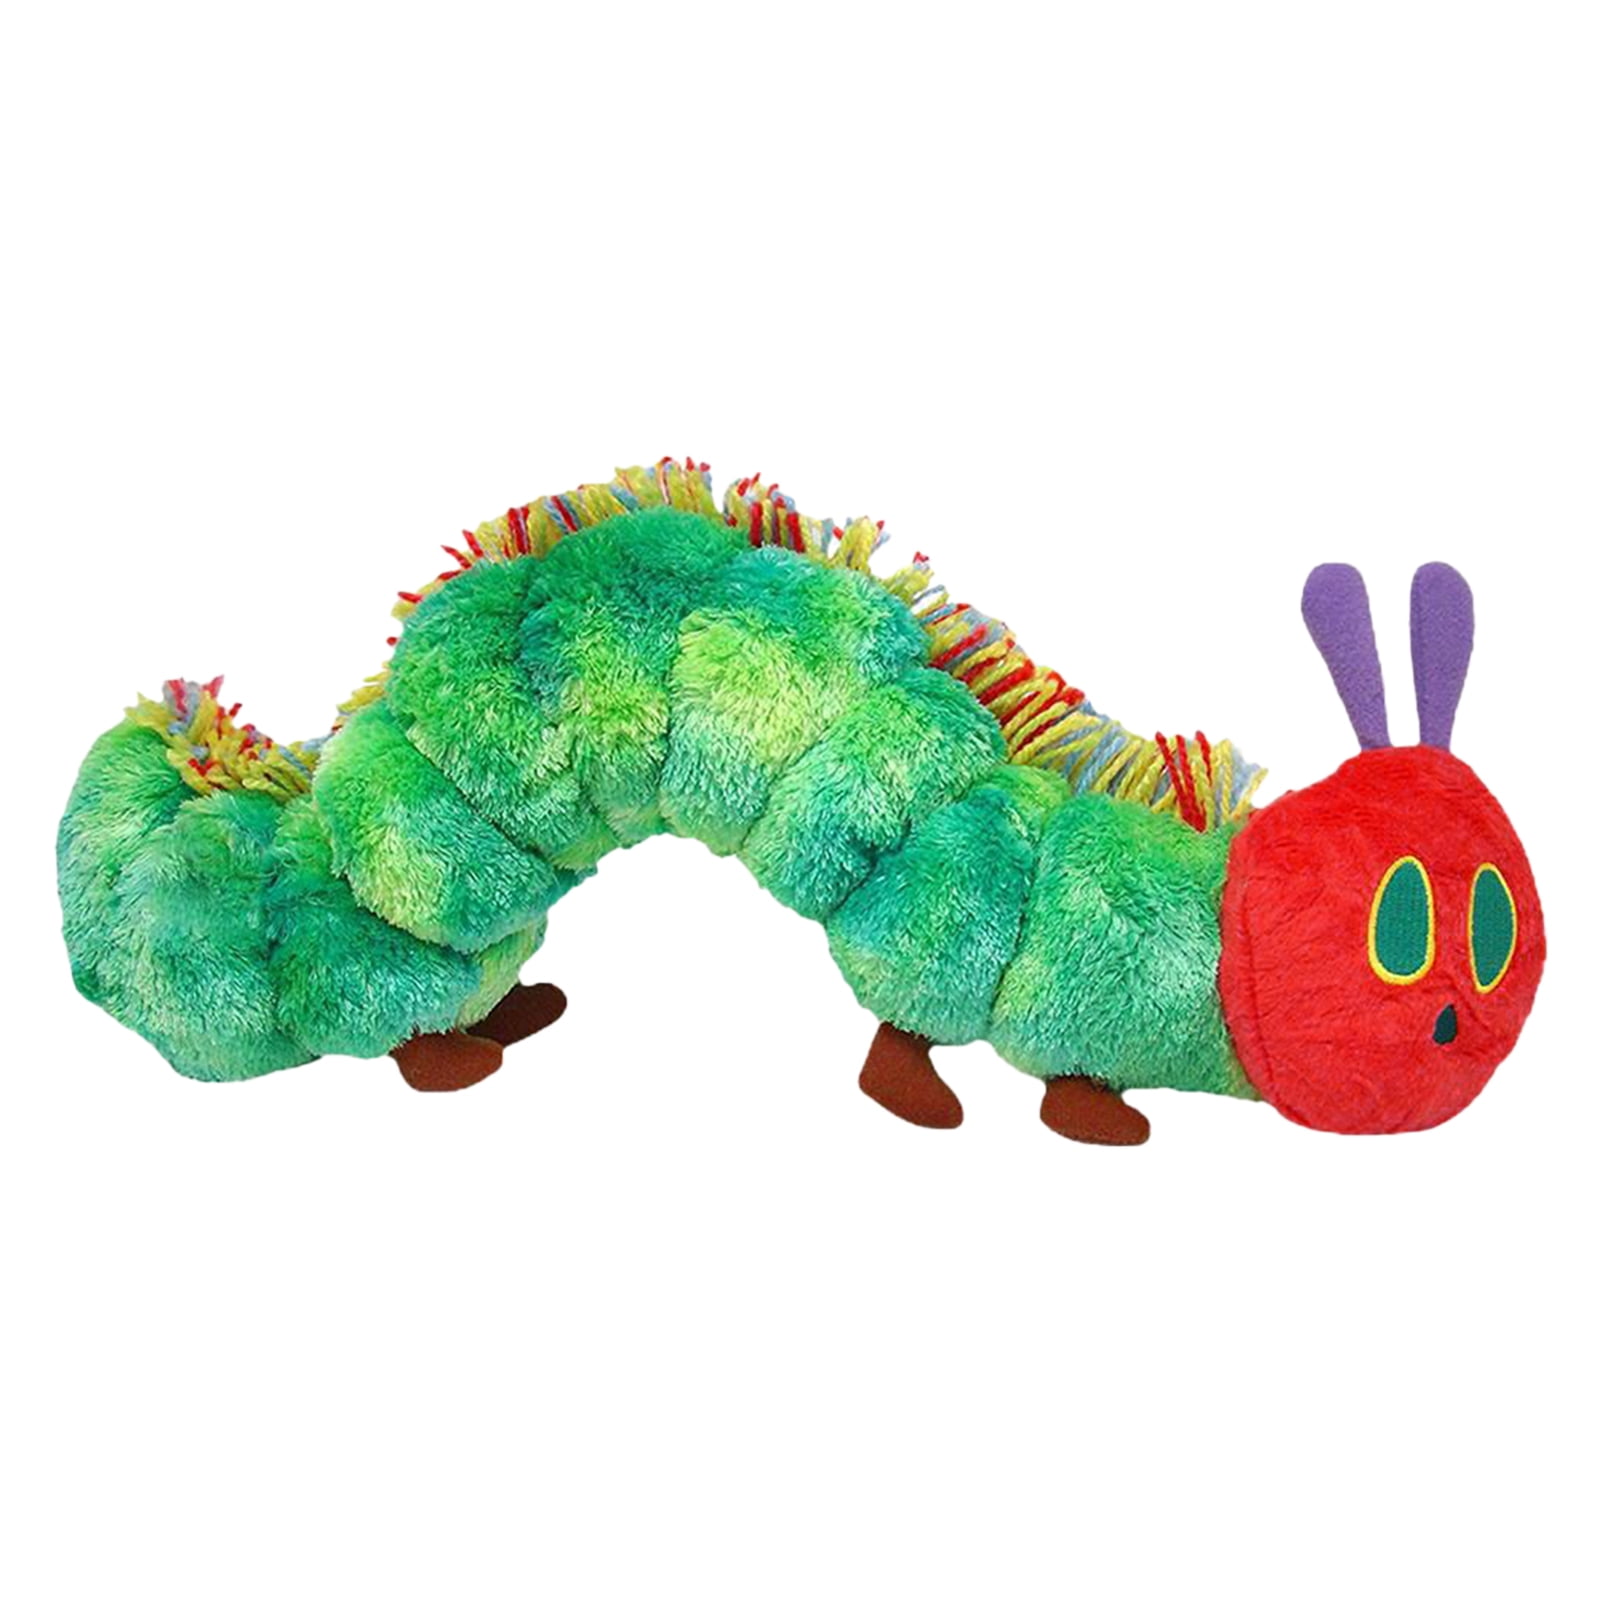 The Very Hungry Caterpillar 12" Square Complete Cushion 